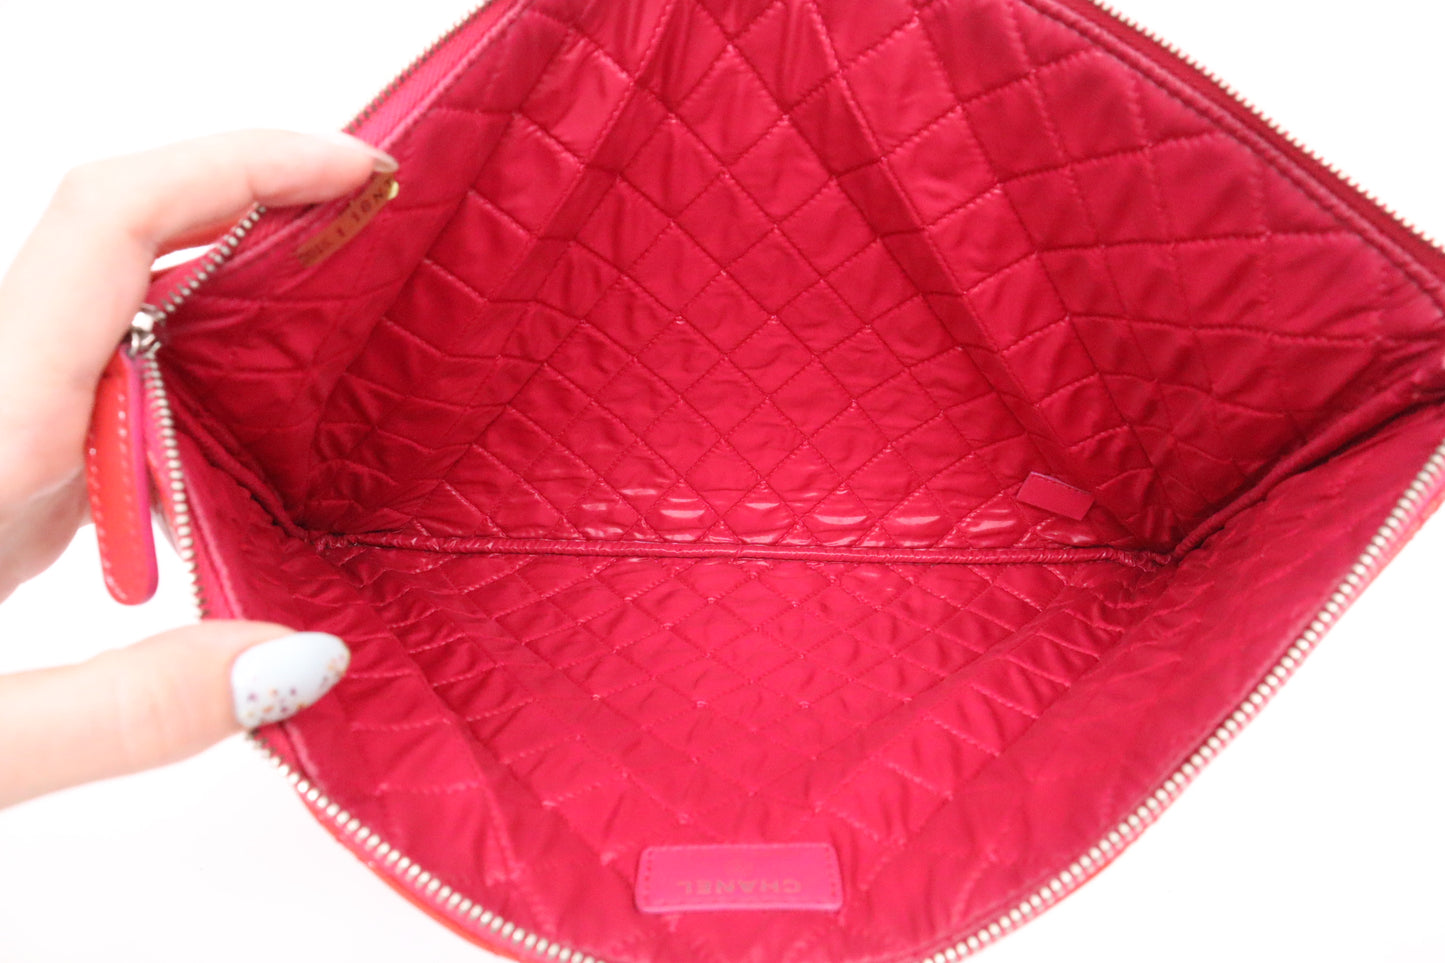 Chanel Large O Case in Pink Patent Leather